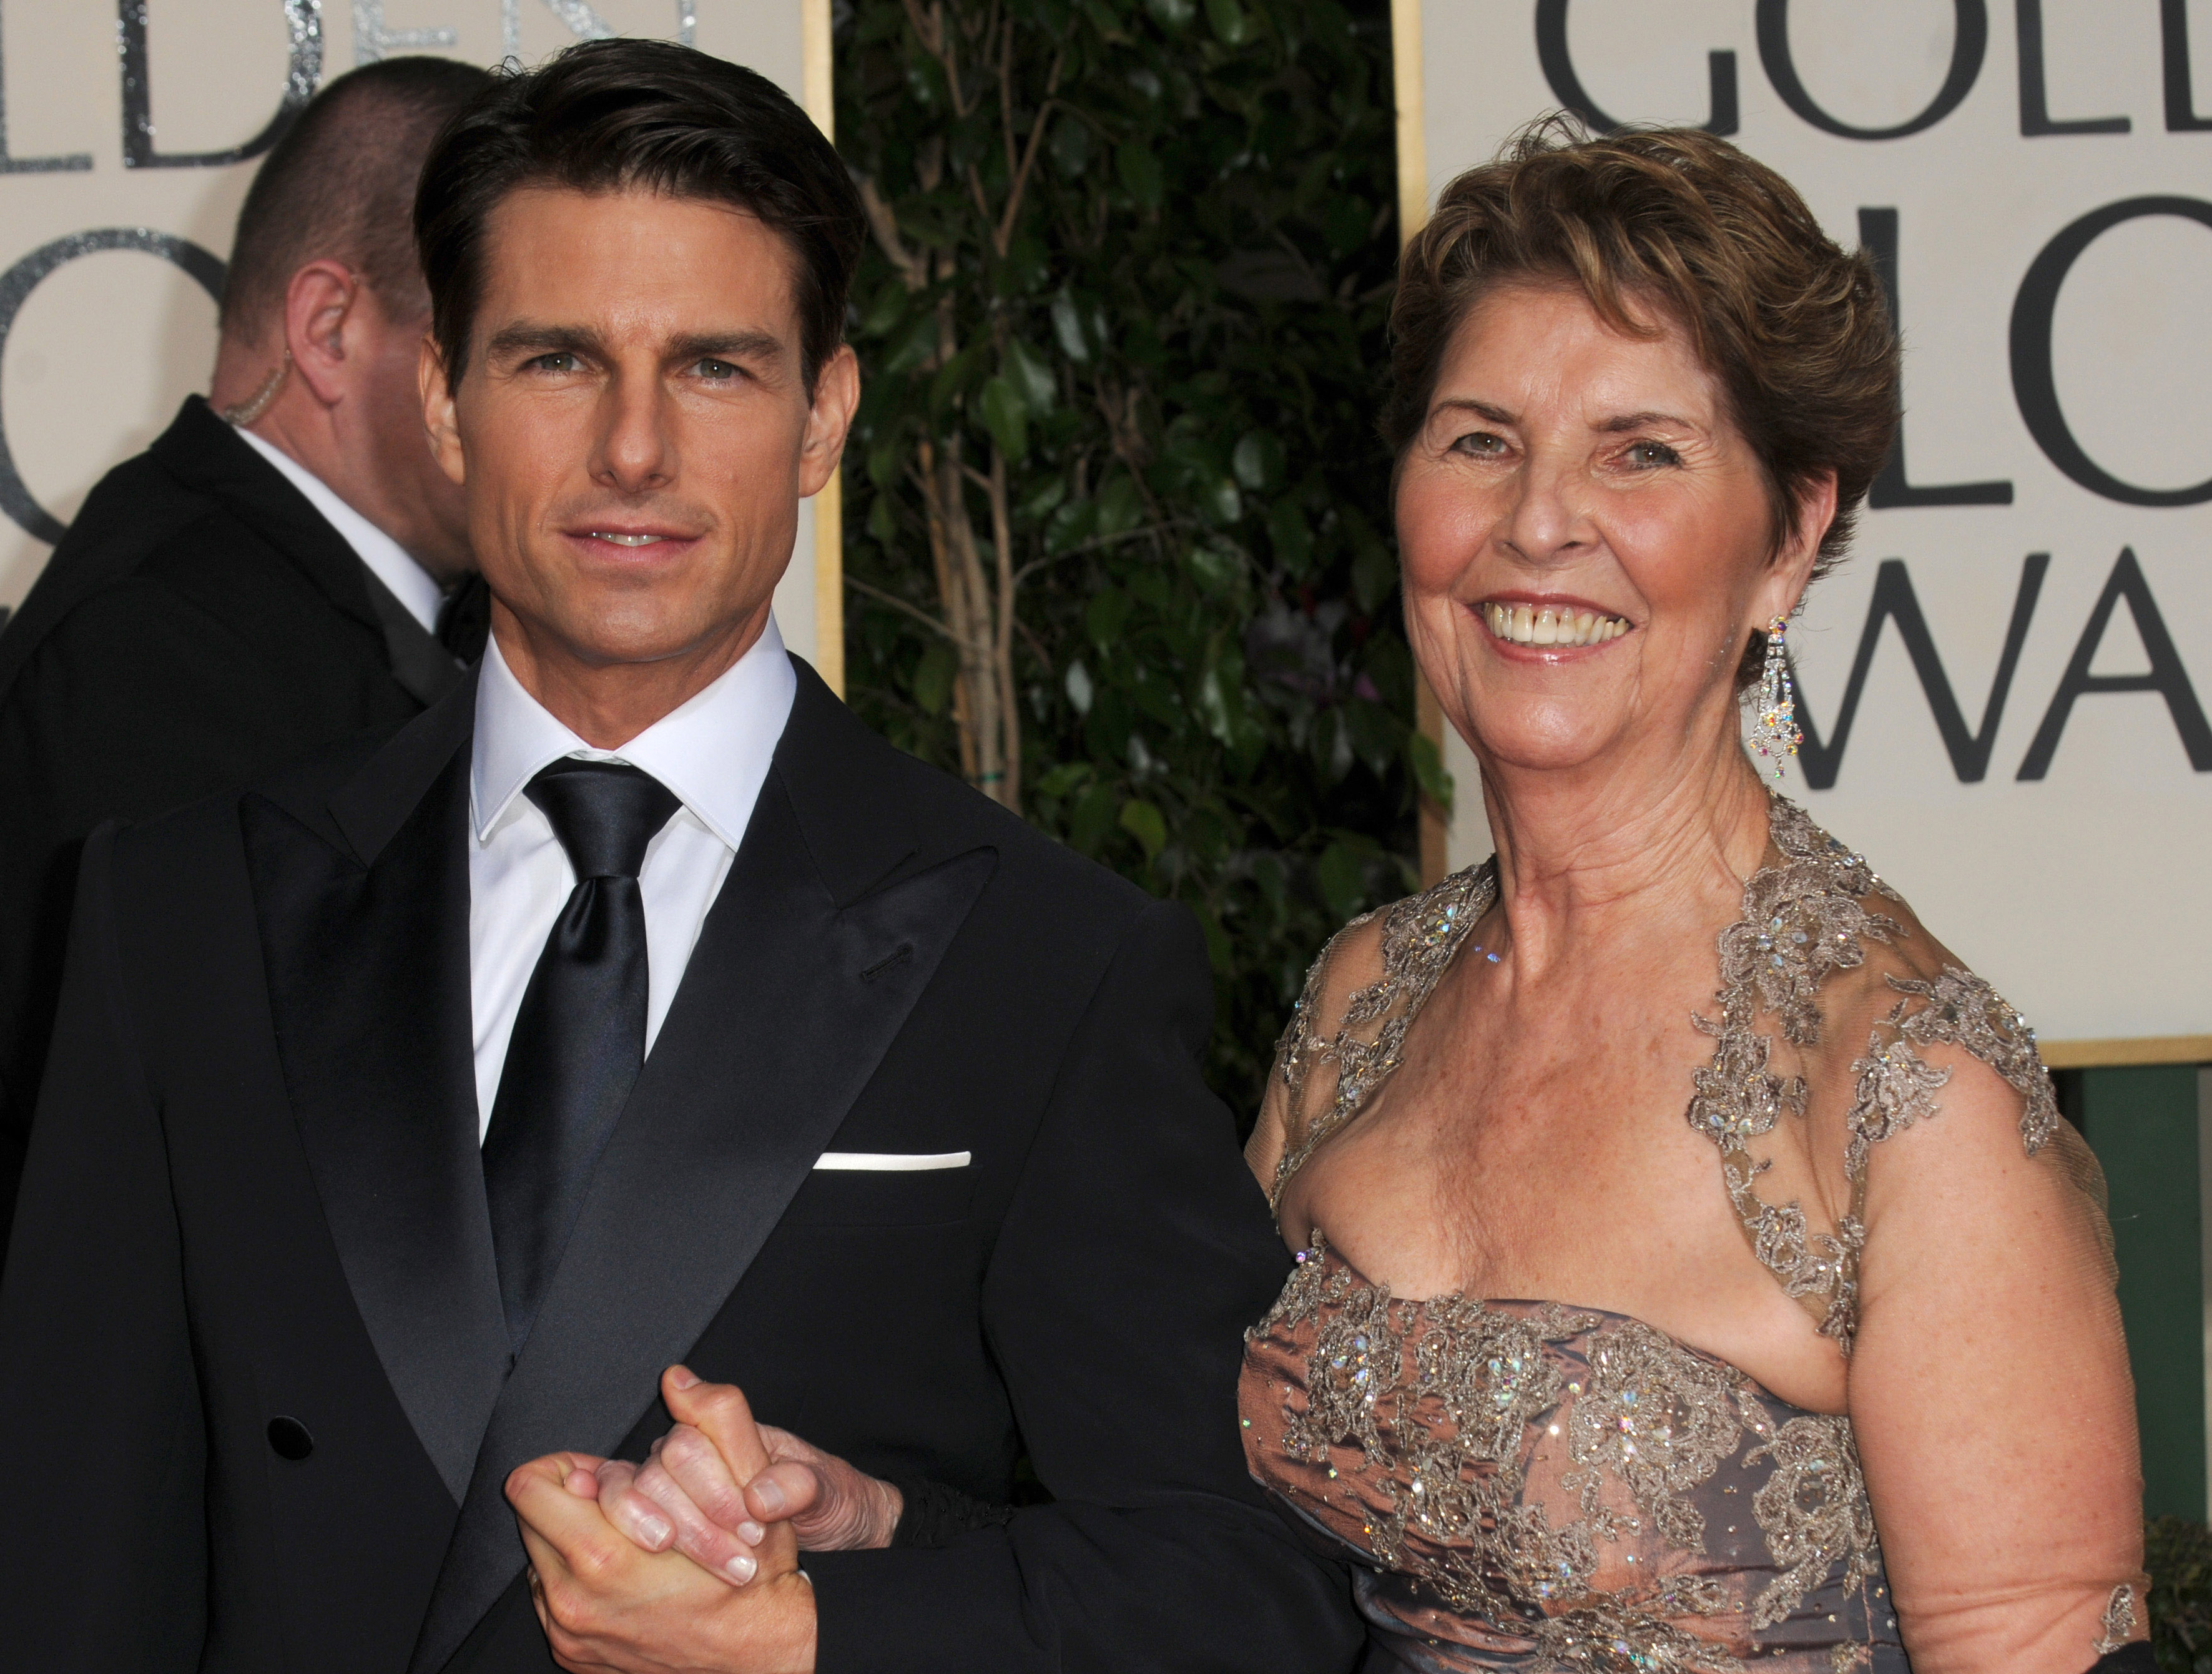 Tom Cruise und Mary Lee Pfeiffer bei den 66th Annual Golden Globe Awards in Hollywood, 2009 | Quelle: Getty Images